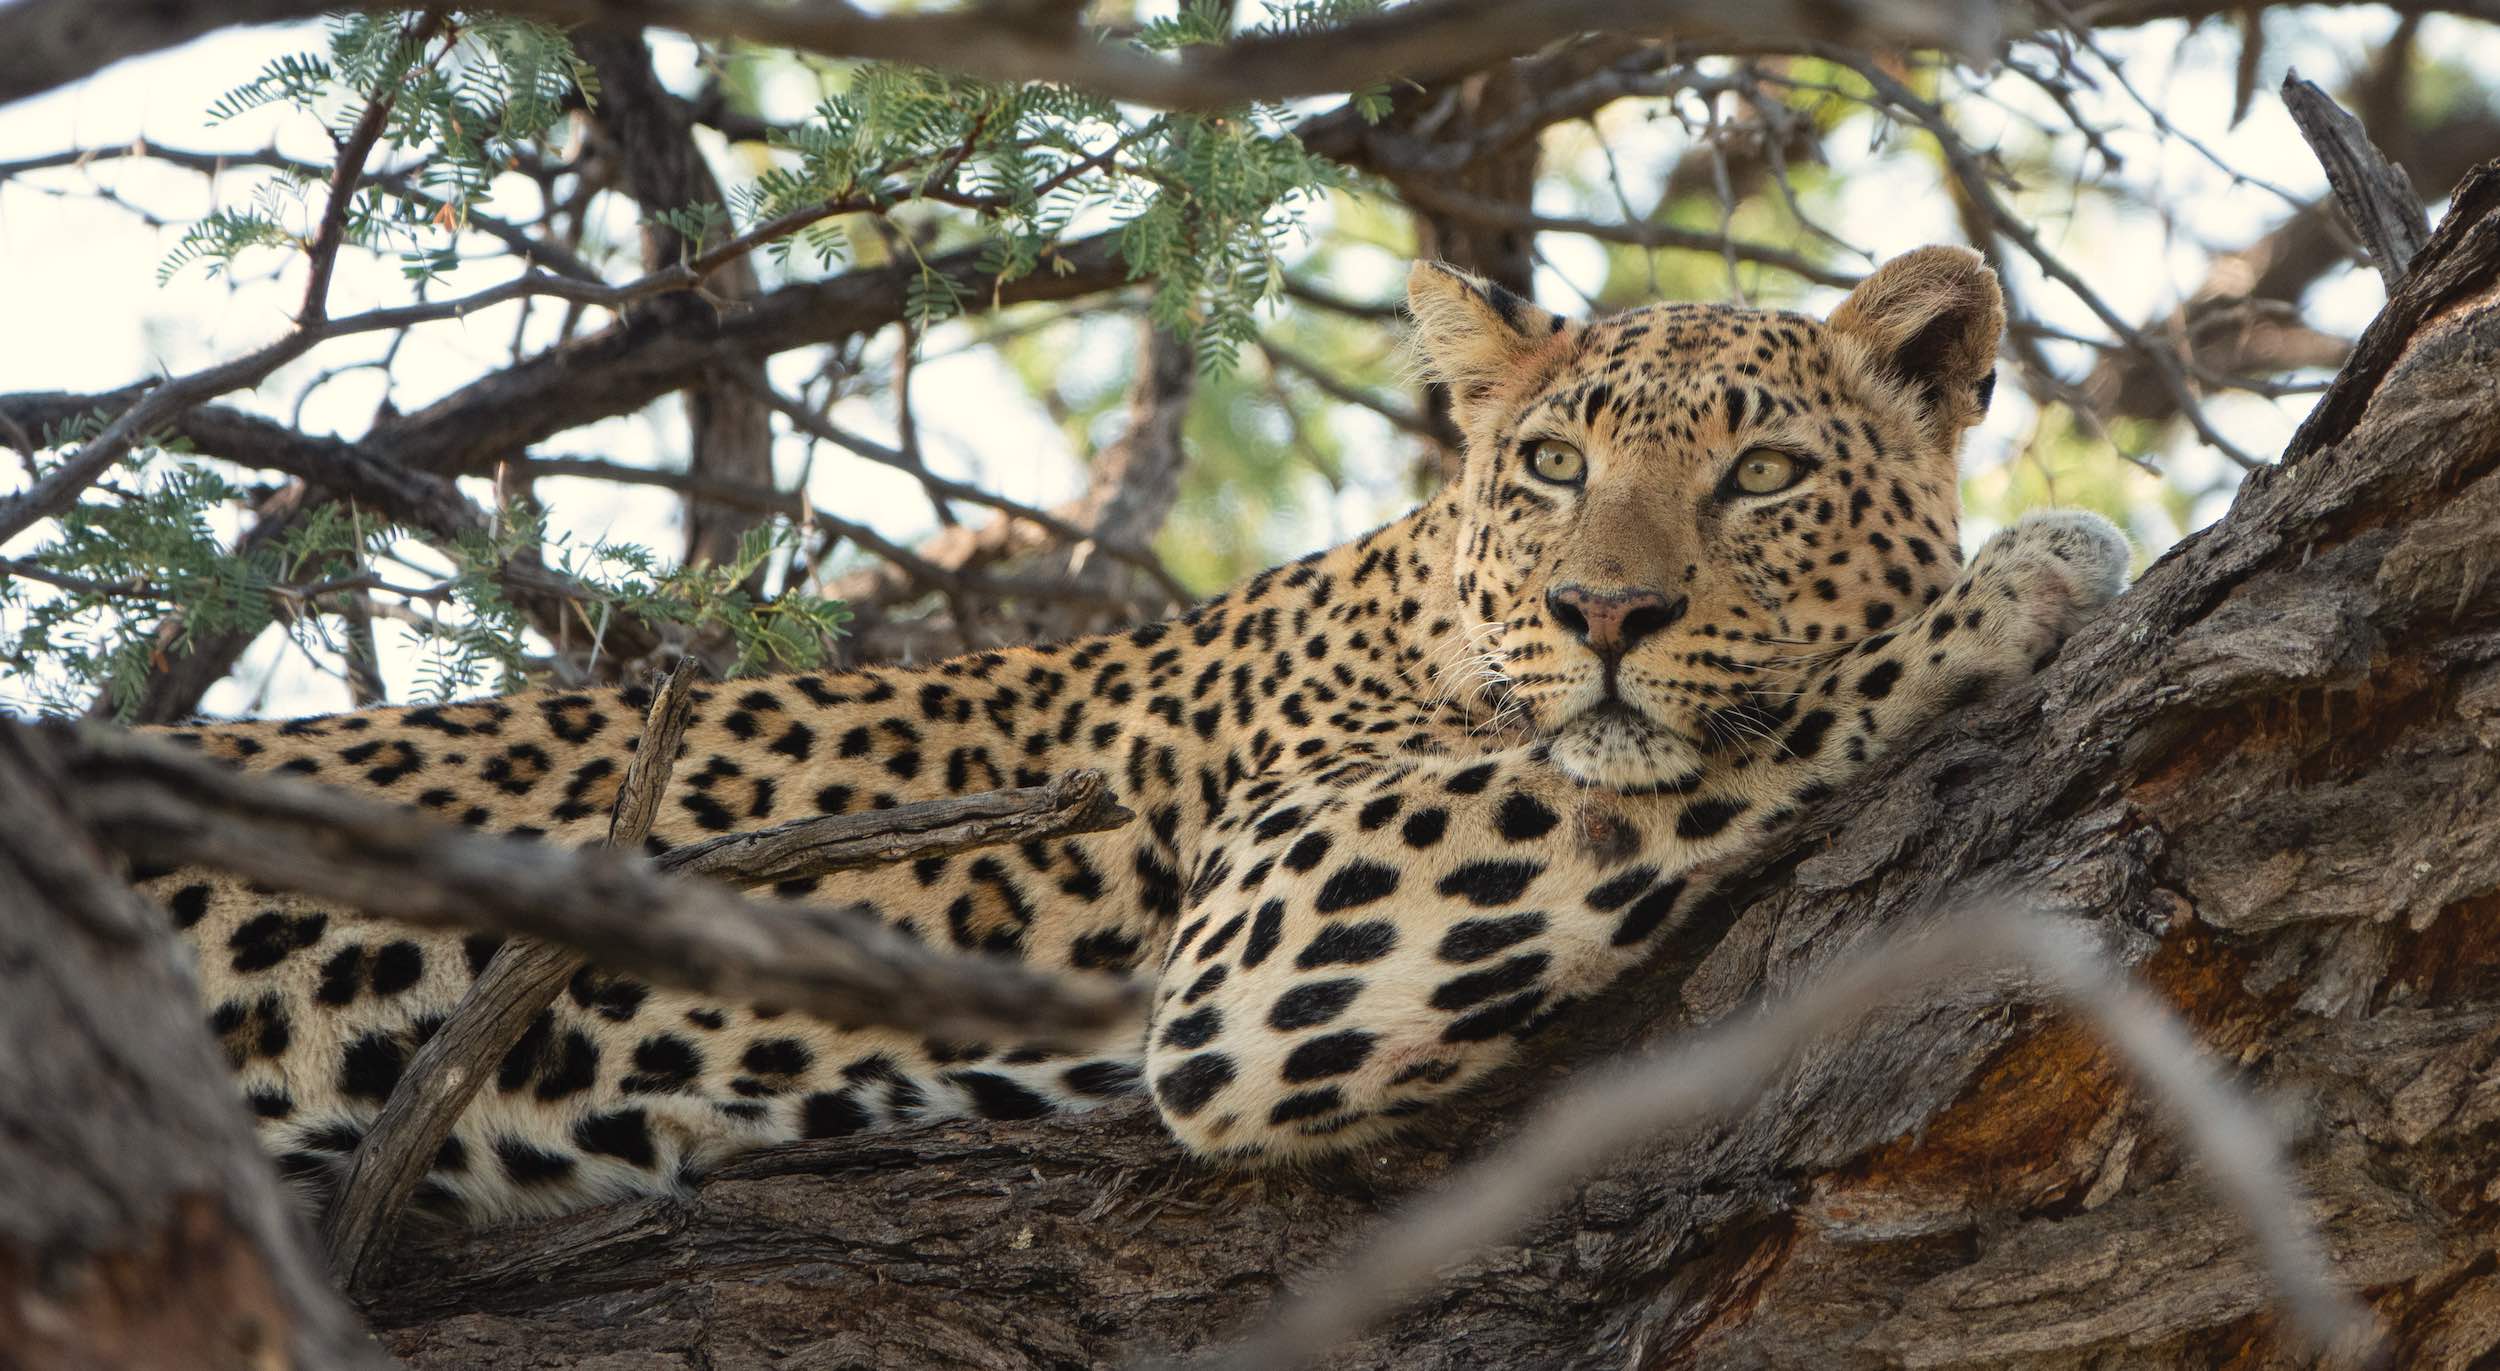 A leopard relaxes on the branch of a tree.